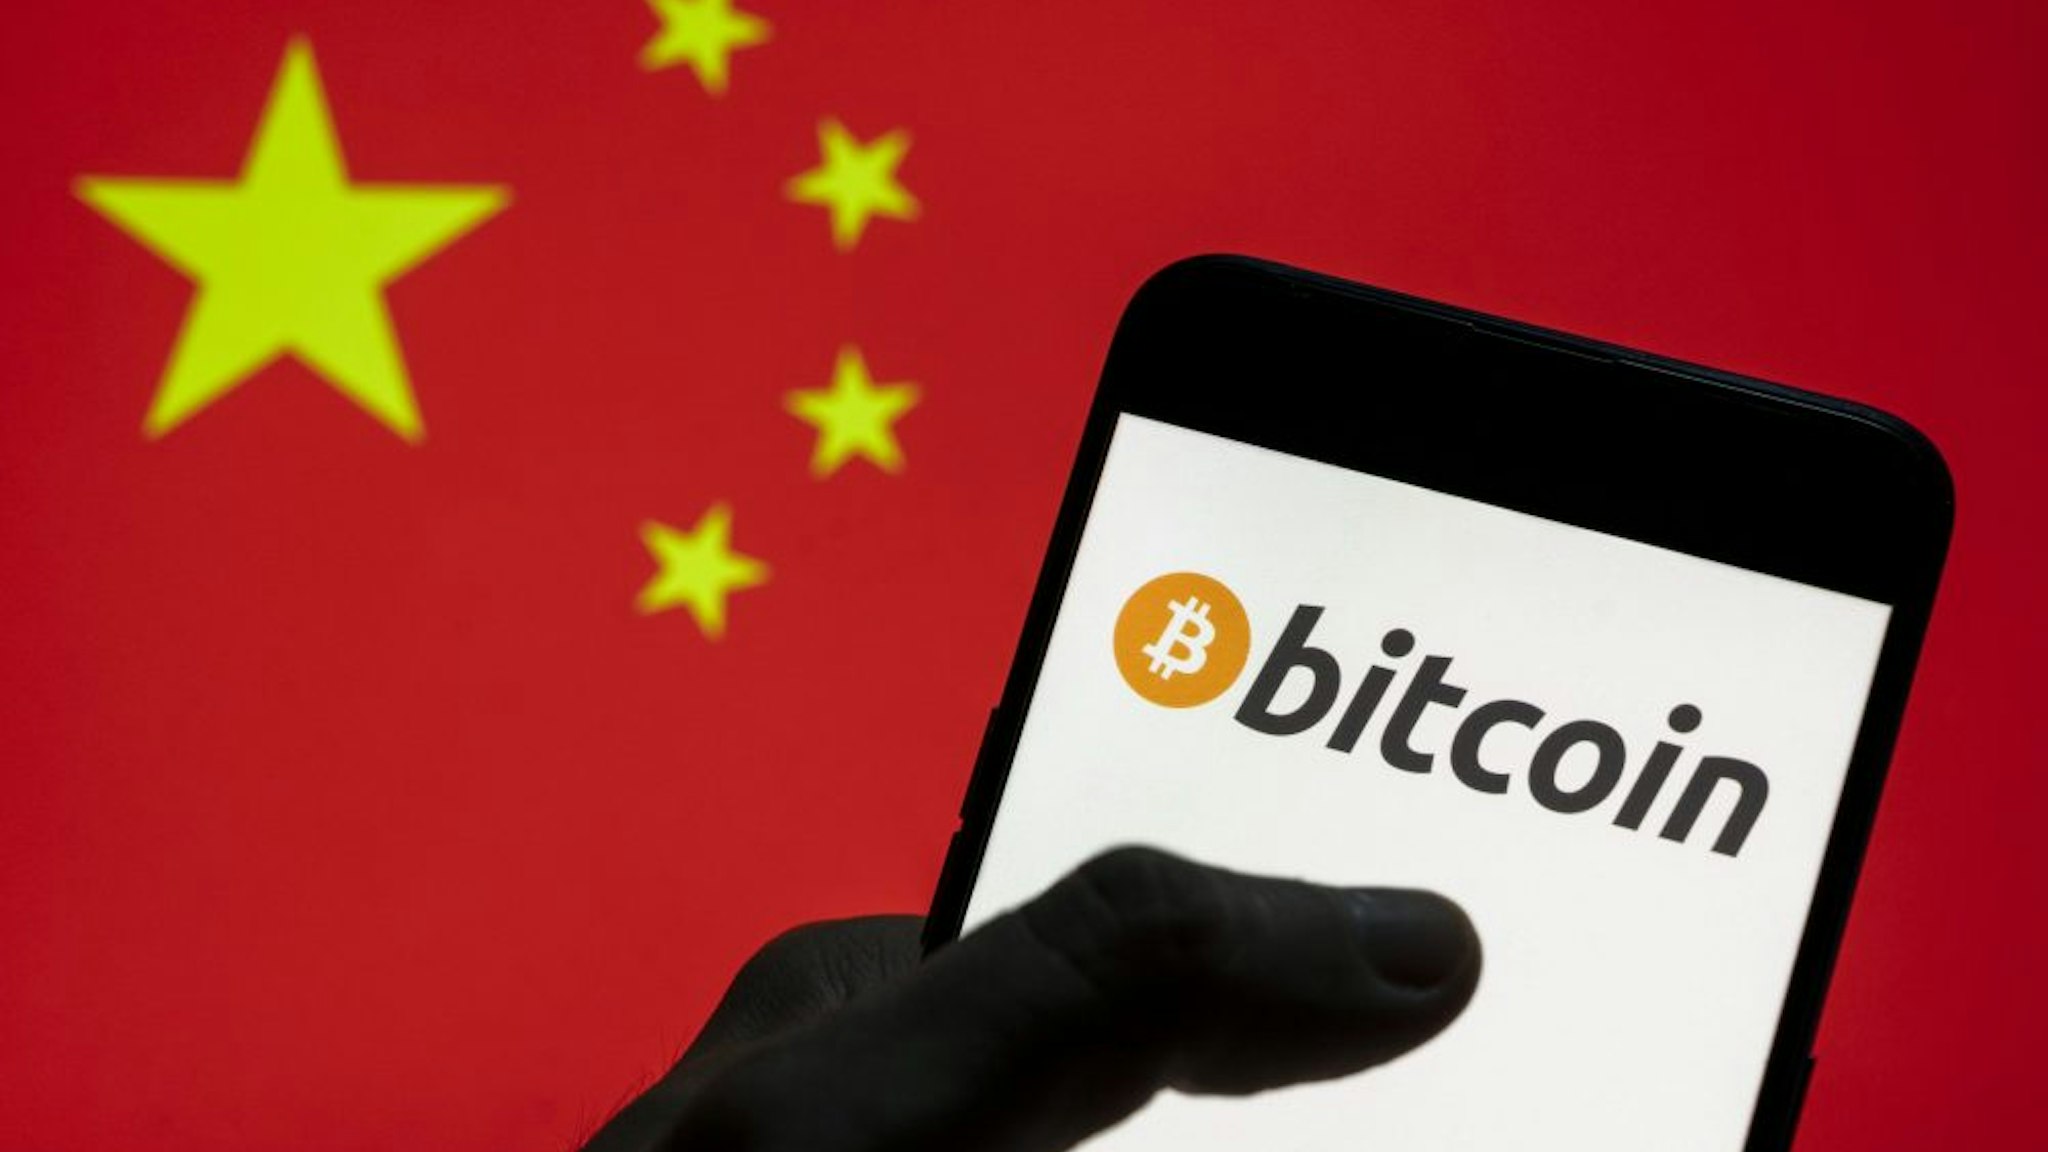 CHINA - 2021/03/28: In this photo illustration the Cryptocurrency electronic cash Bitcoin logo seen on an Android mobile device with People's Republic of China flag in the background.